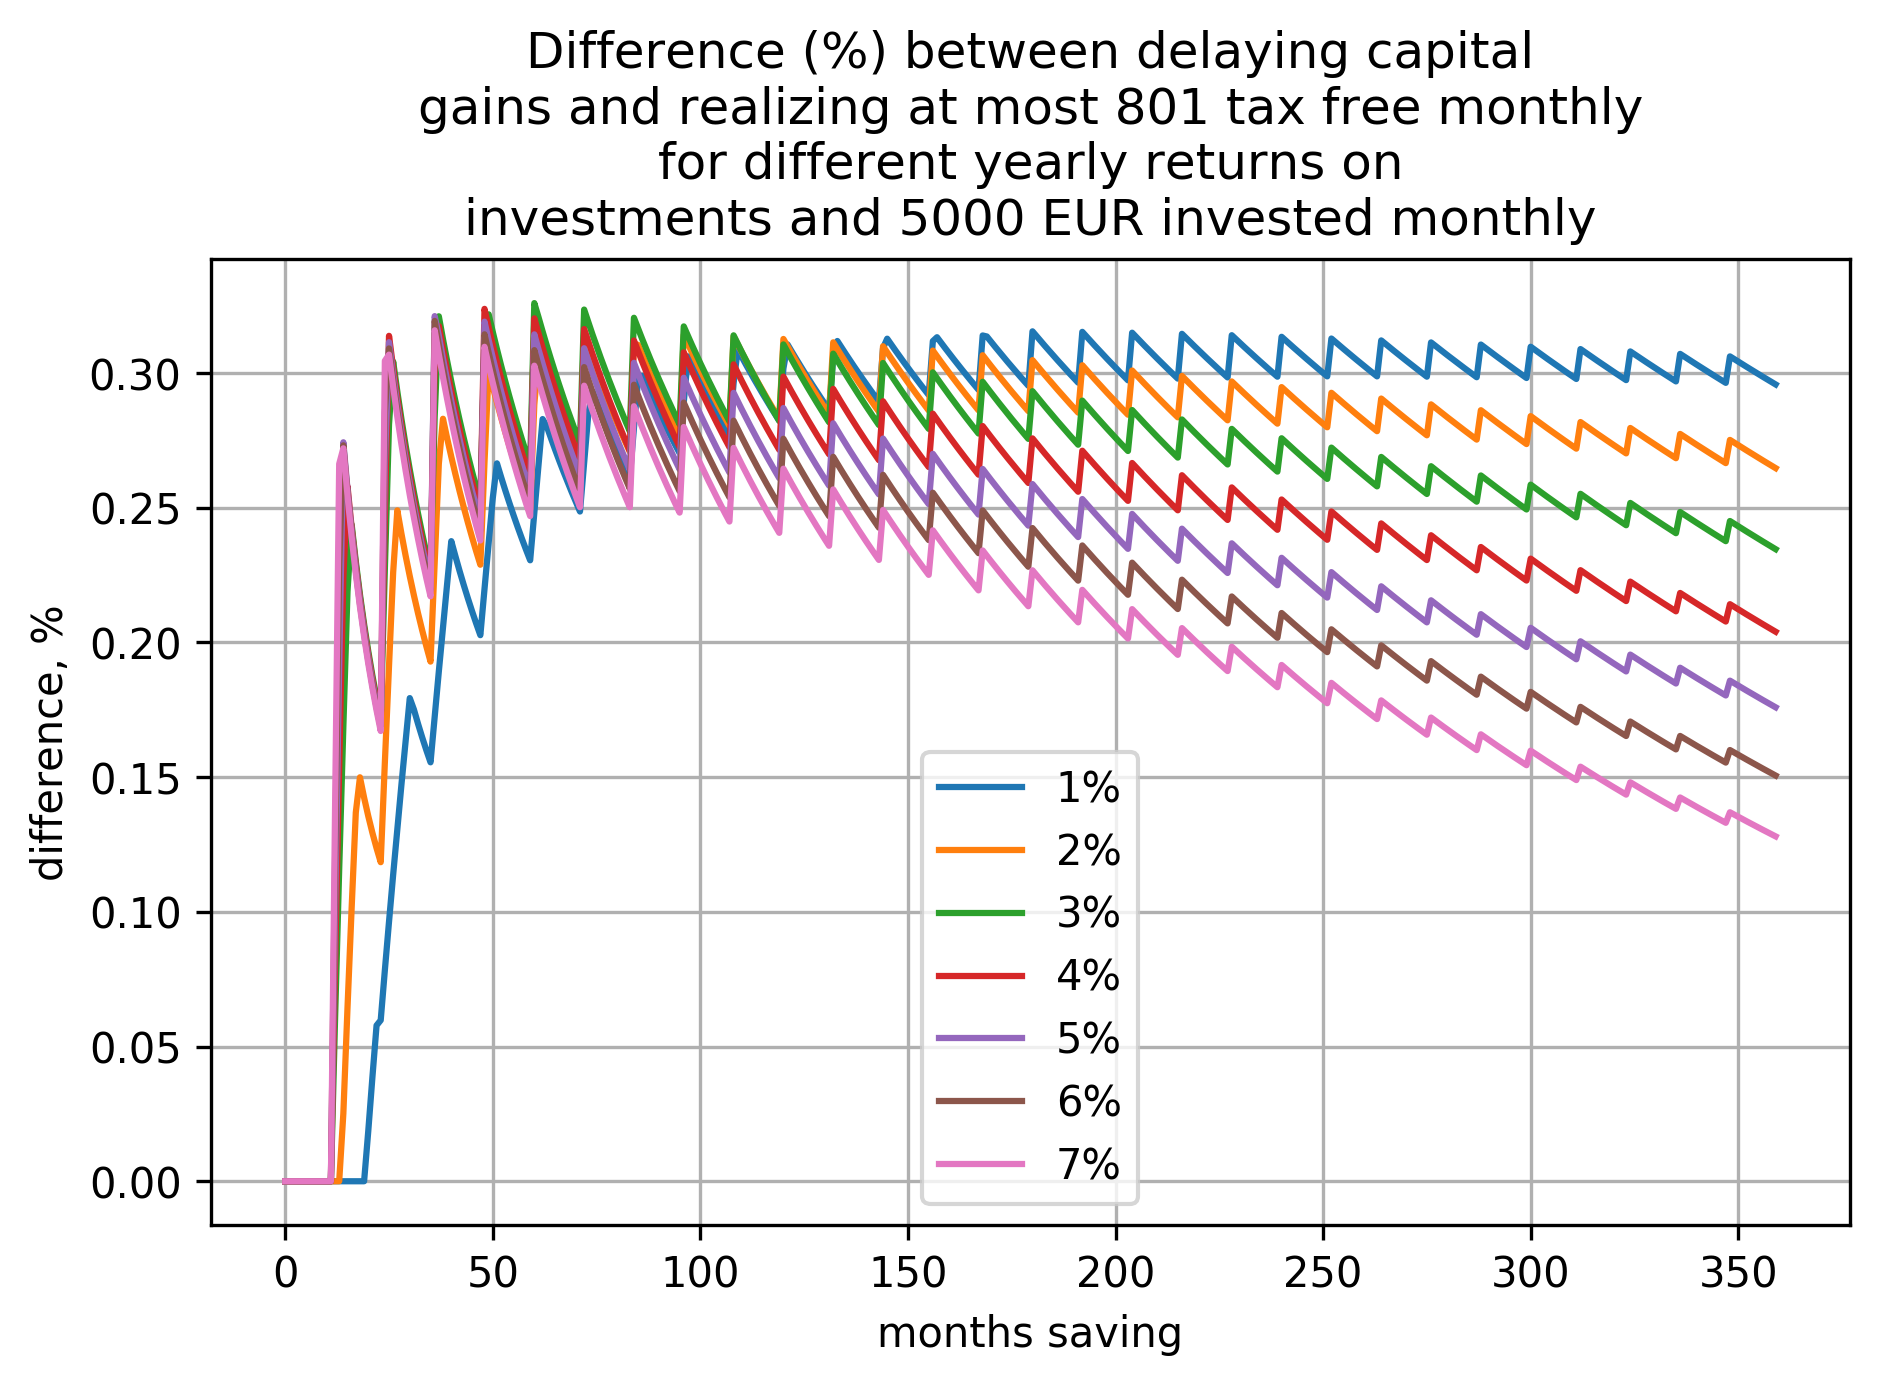 a plot showing how difference (in percents) between the two cases (delaying capital gains and
realizing at most 801€ tax free yearly) depends on time saving and yearly return on
investment when investing 5000€ per month